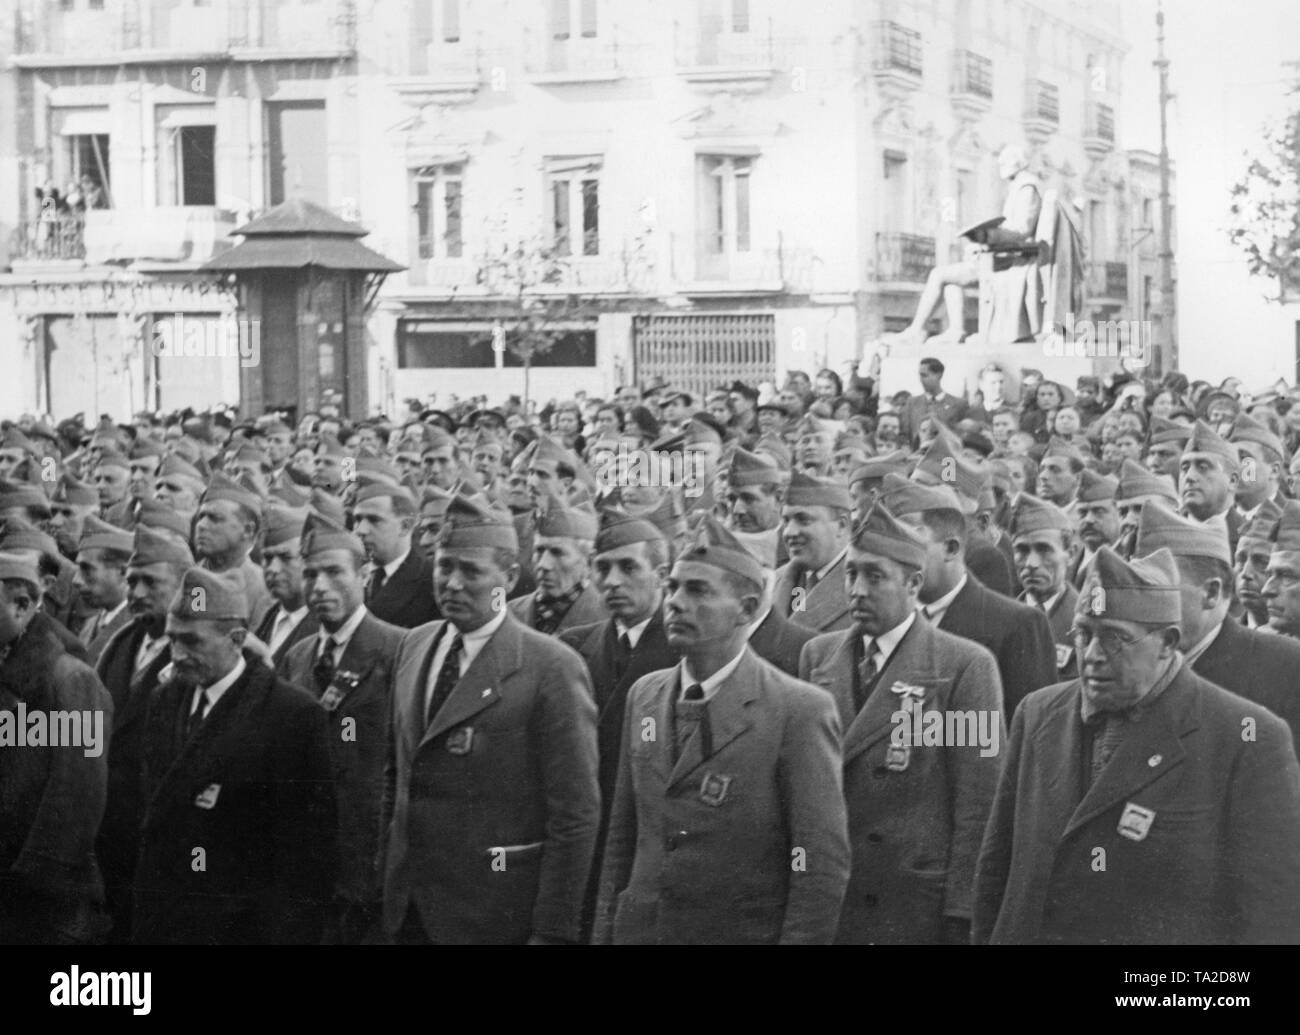 Photo of militants of the Falange Espanola (Fascist Party of Spain) in an unknown city ??of Spain invaded by General Franco's troops six months after the outbreak of the Civil War. The attendants stand upright and pledge their faithfulness to the Spanish national government. They wear gorillo caps and civilian clothes ornamented with stickers of the party (yoke and arrows). Stock Photo